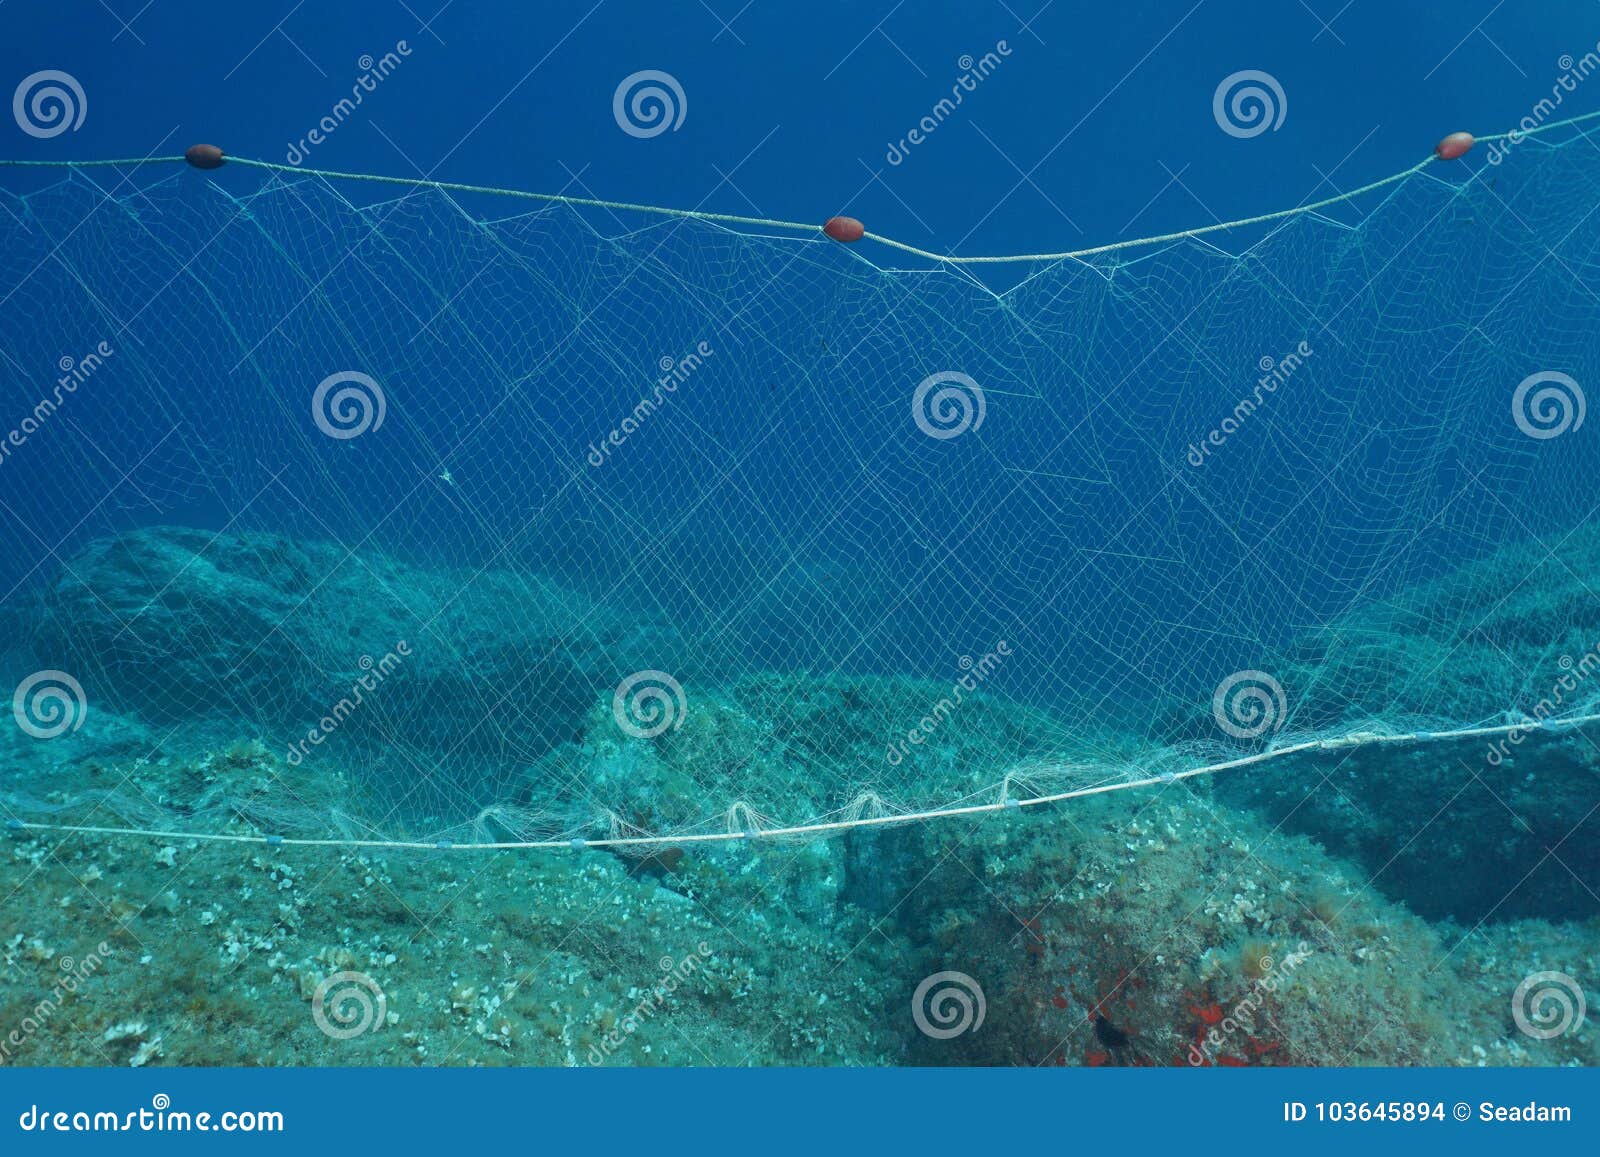 A Fishing Net Gillnet Underwater on the Seabed Stock Photo - Image